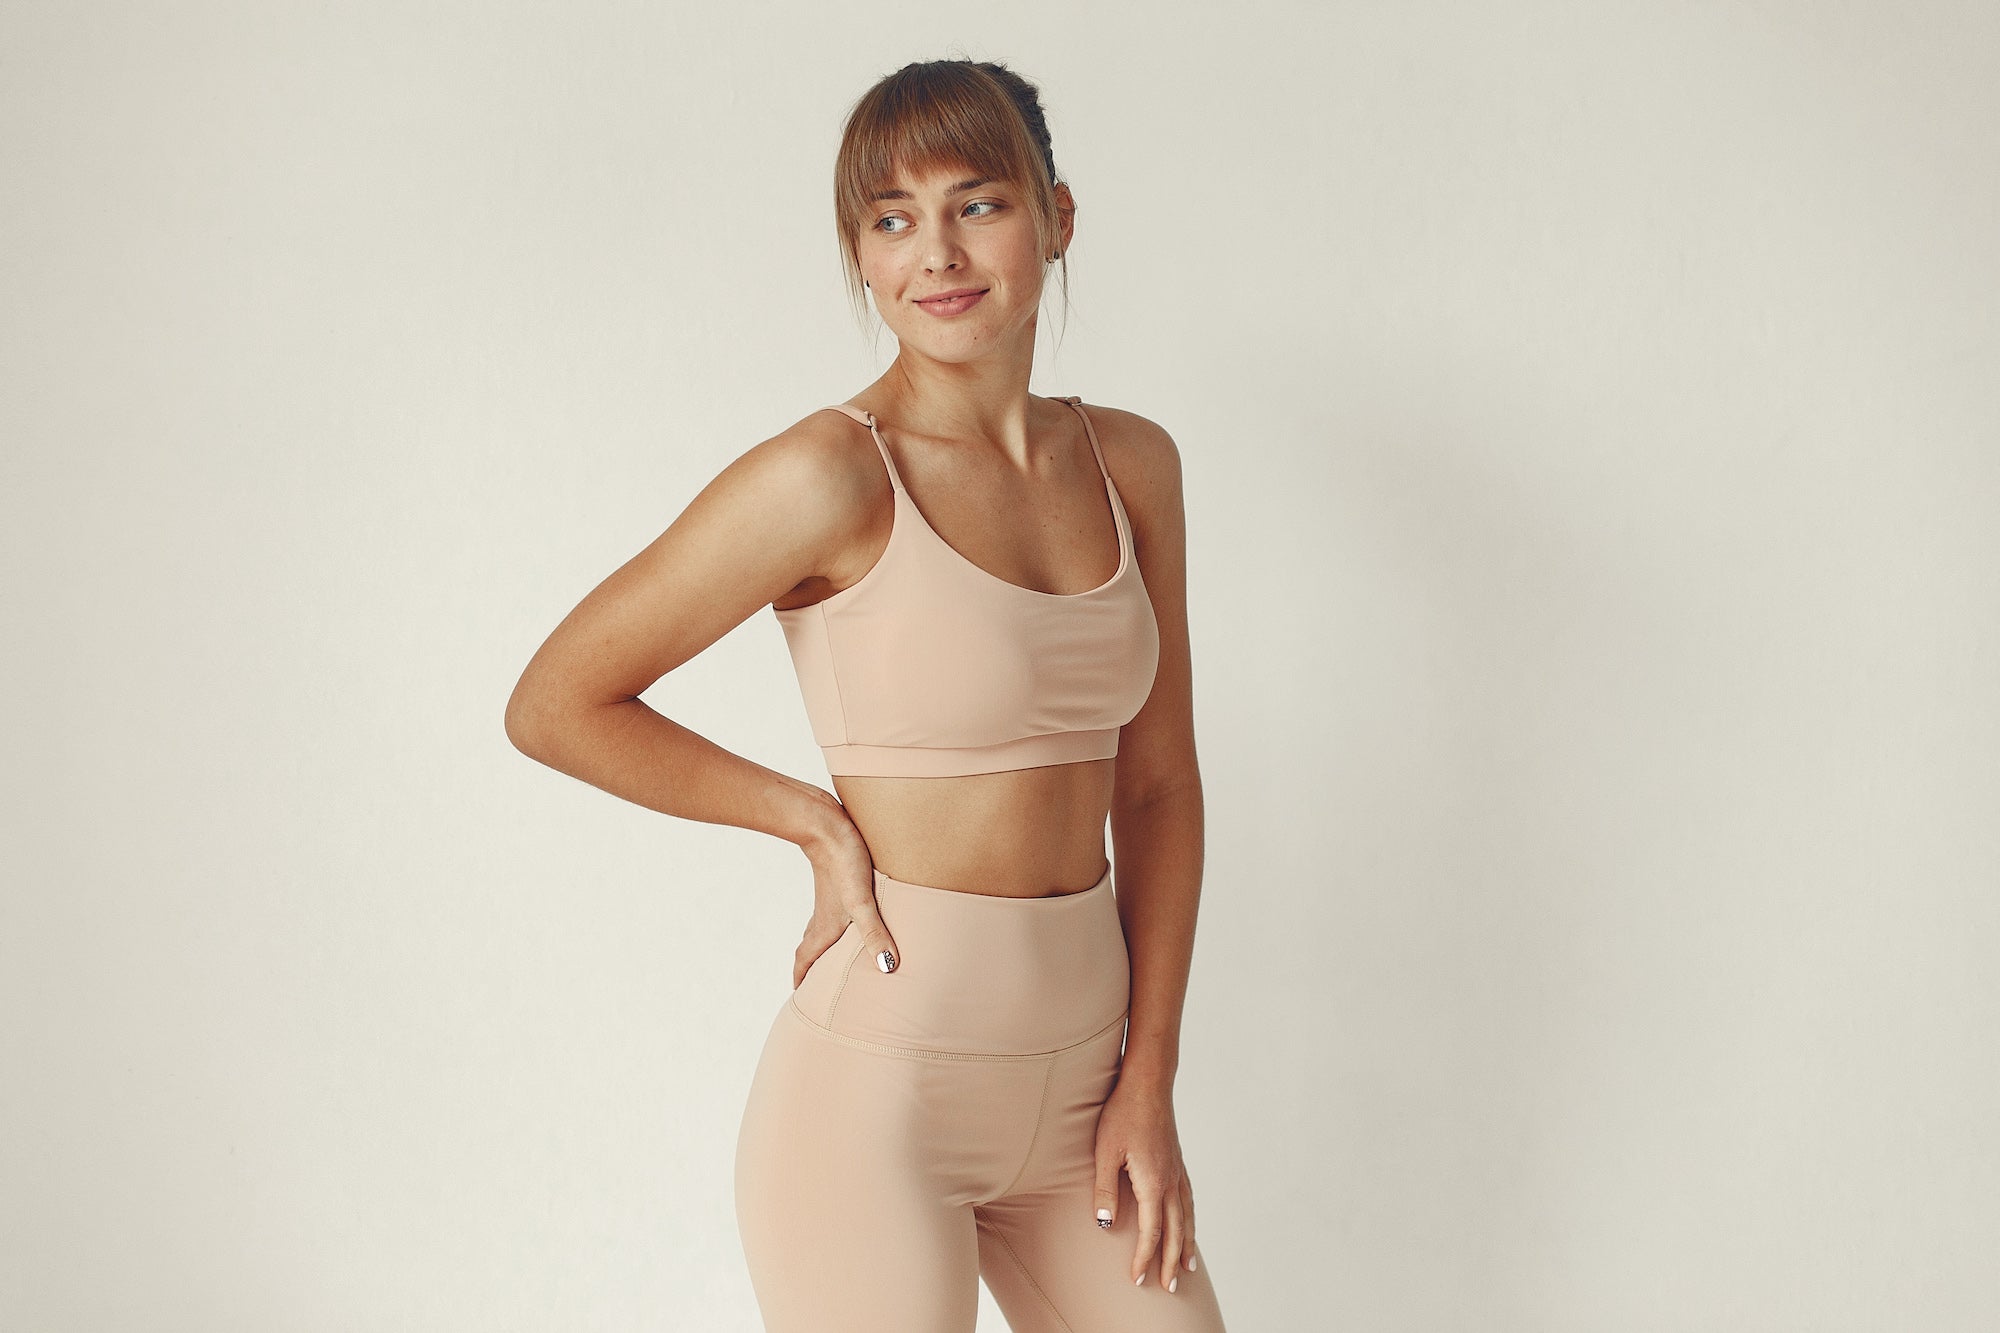 How shapewear should fit and feel - A guide for first-time shapewear buyers